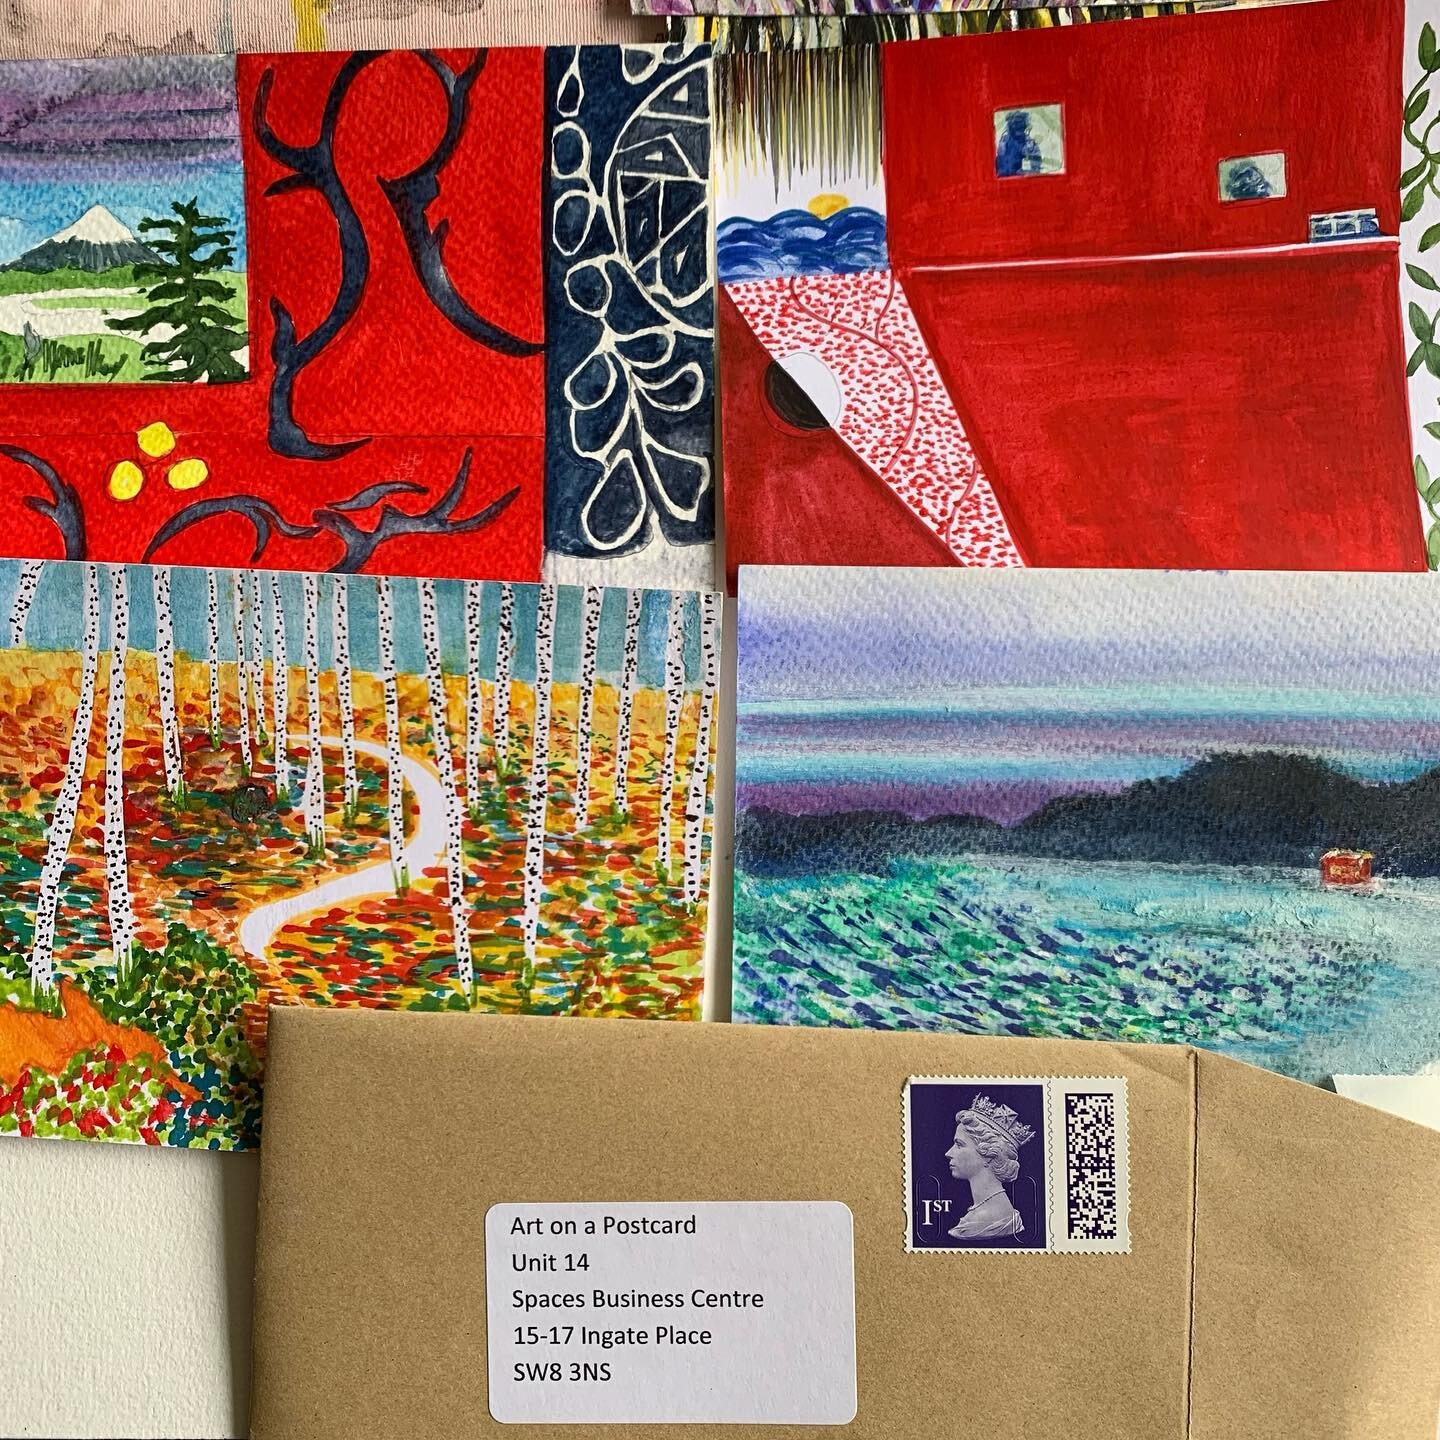 Sneak peak of some of the Matisse and Klimt inspired postcards I am sending to @artonapostcard 
Follow them to find out when the auction is.
All for a great cause.
Happy Friday!
😁😁😁😁

#artonapostcard #ceopenstudios #postcards #artcharity #friday 